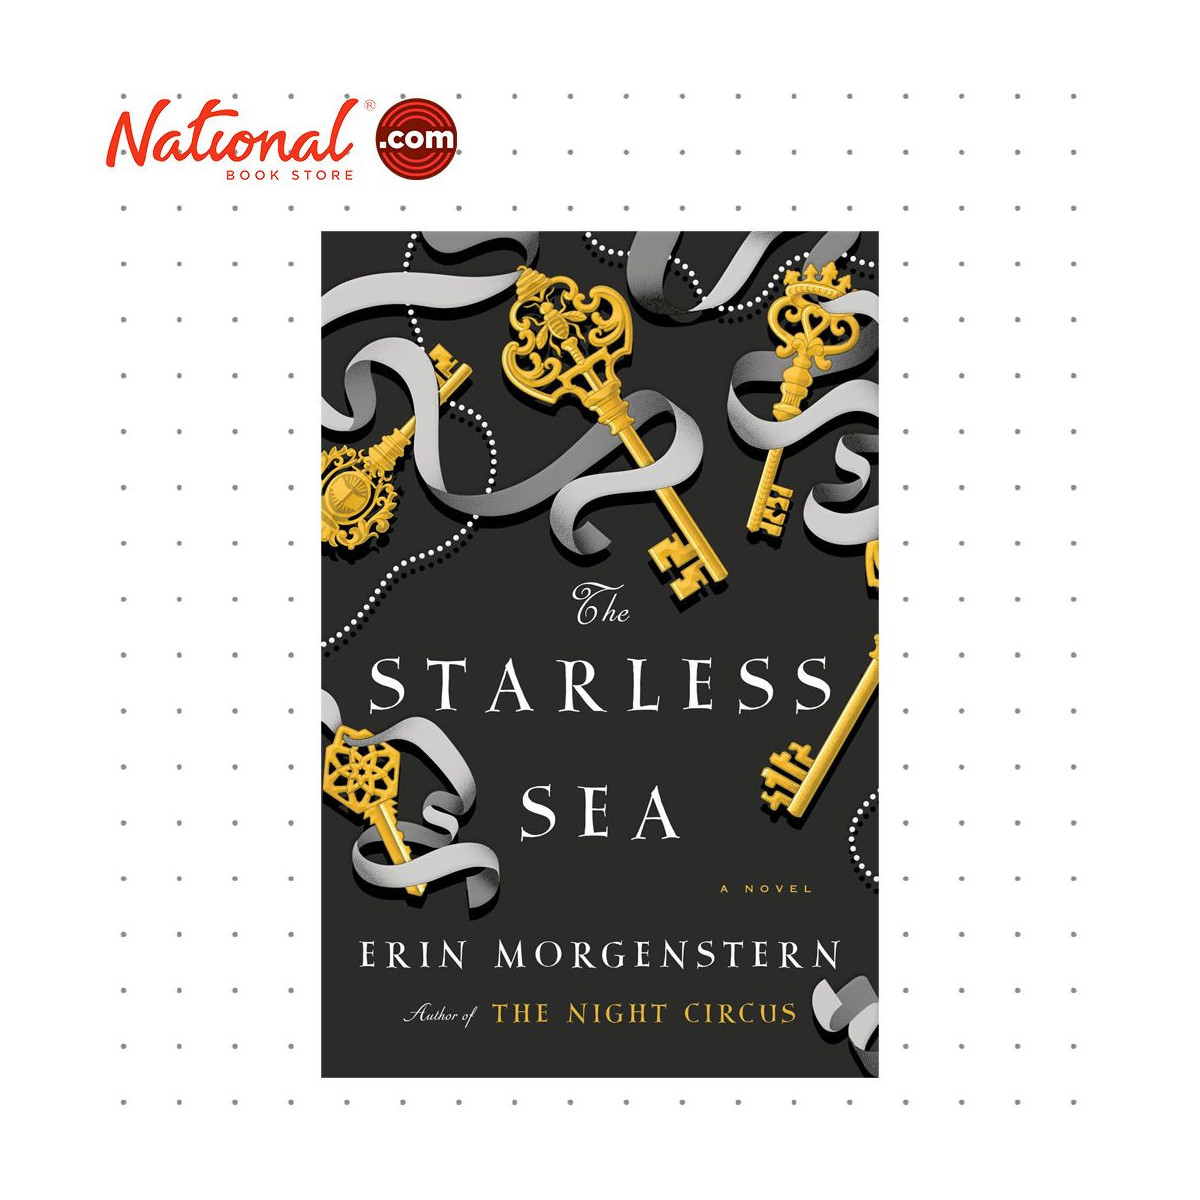 PAPERBACK　ERIN　NOVEL　A　FICTION　THE　STARLESS　CONTEMPORARY　BY　SEA　TRADE　MORGENSTERN